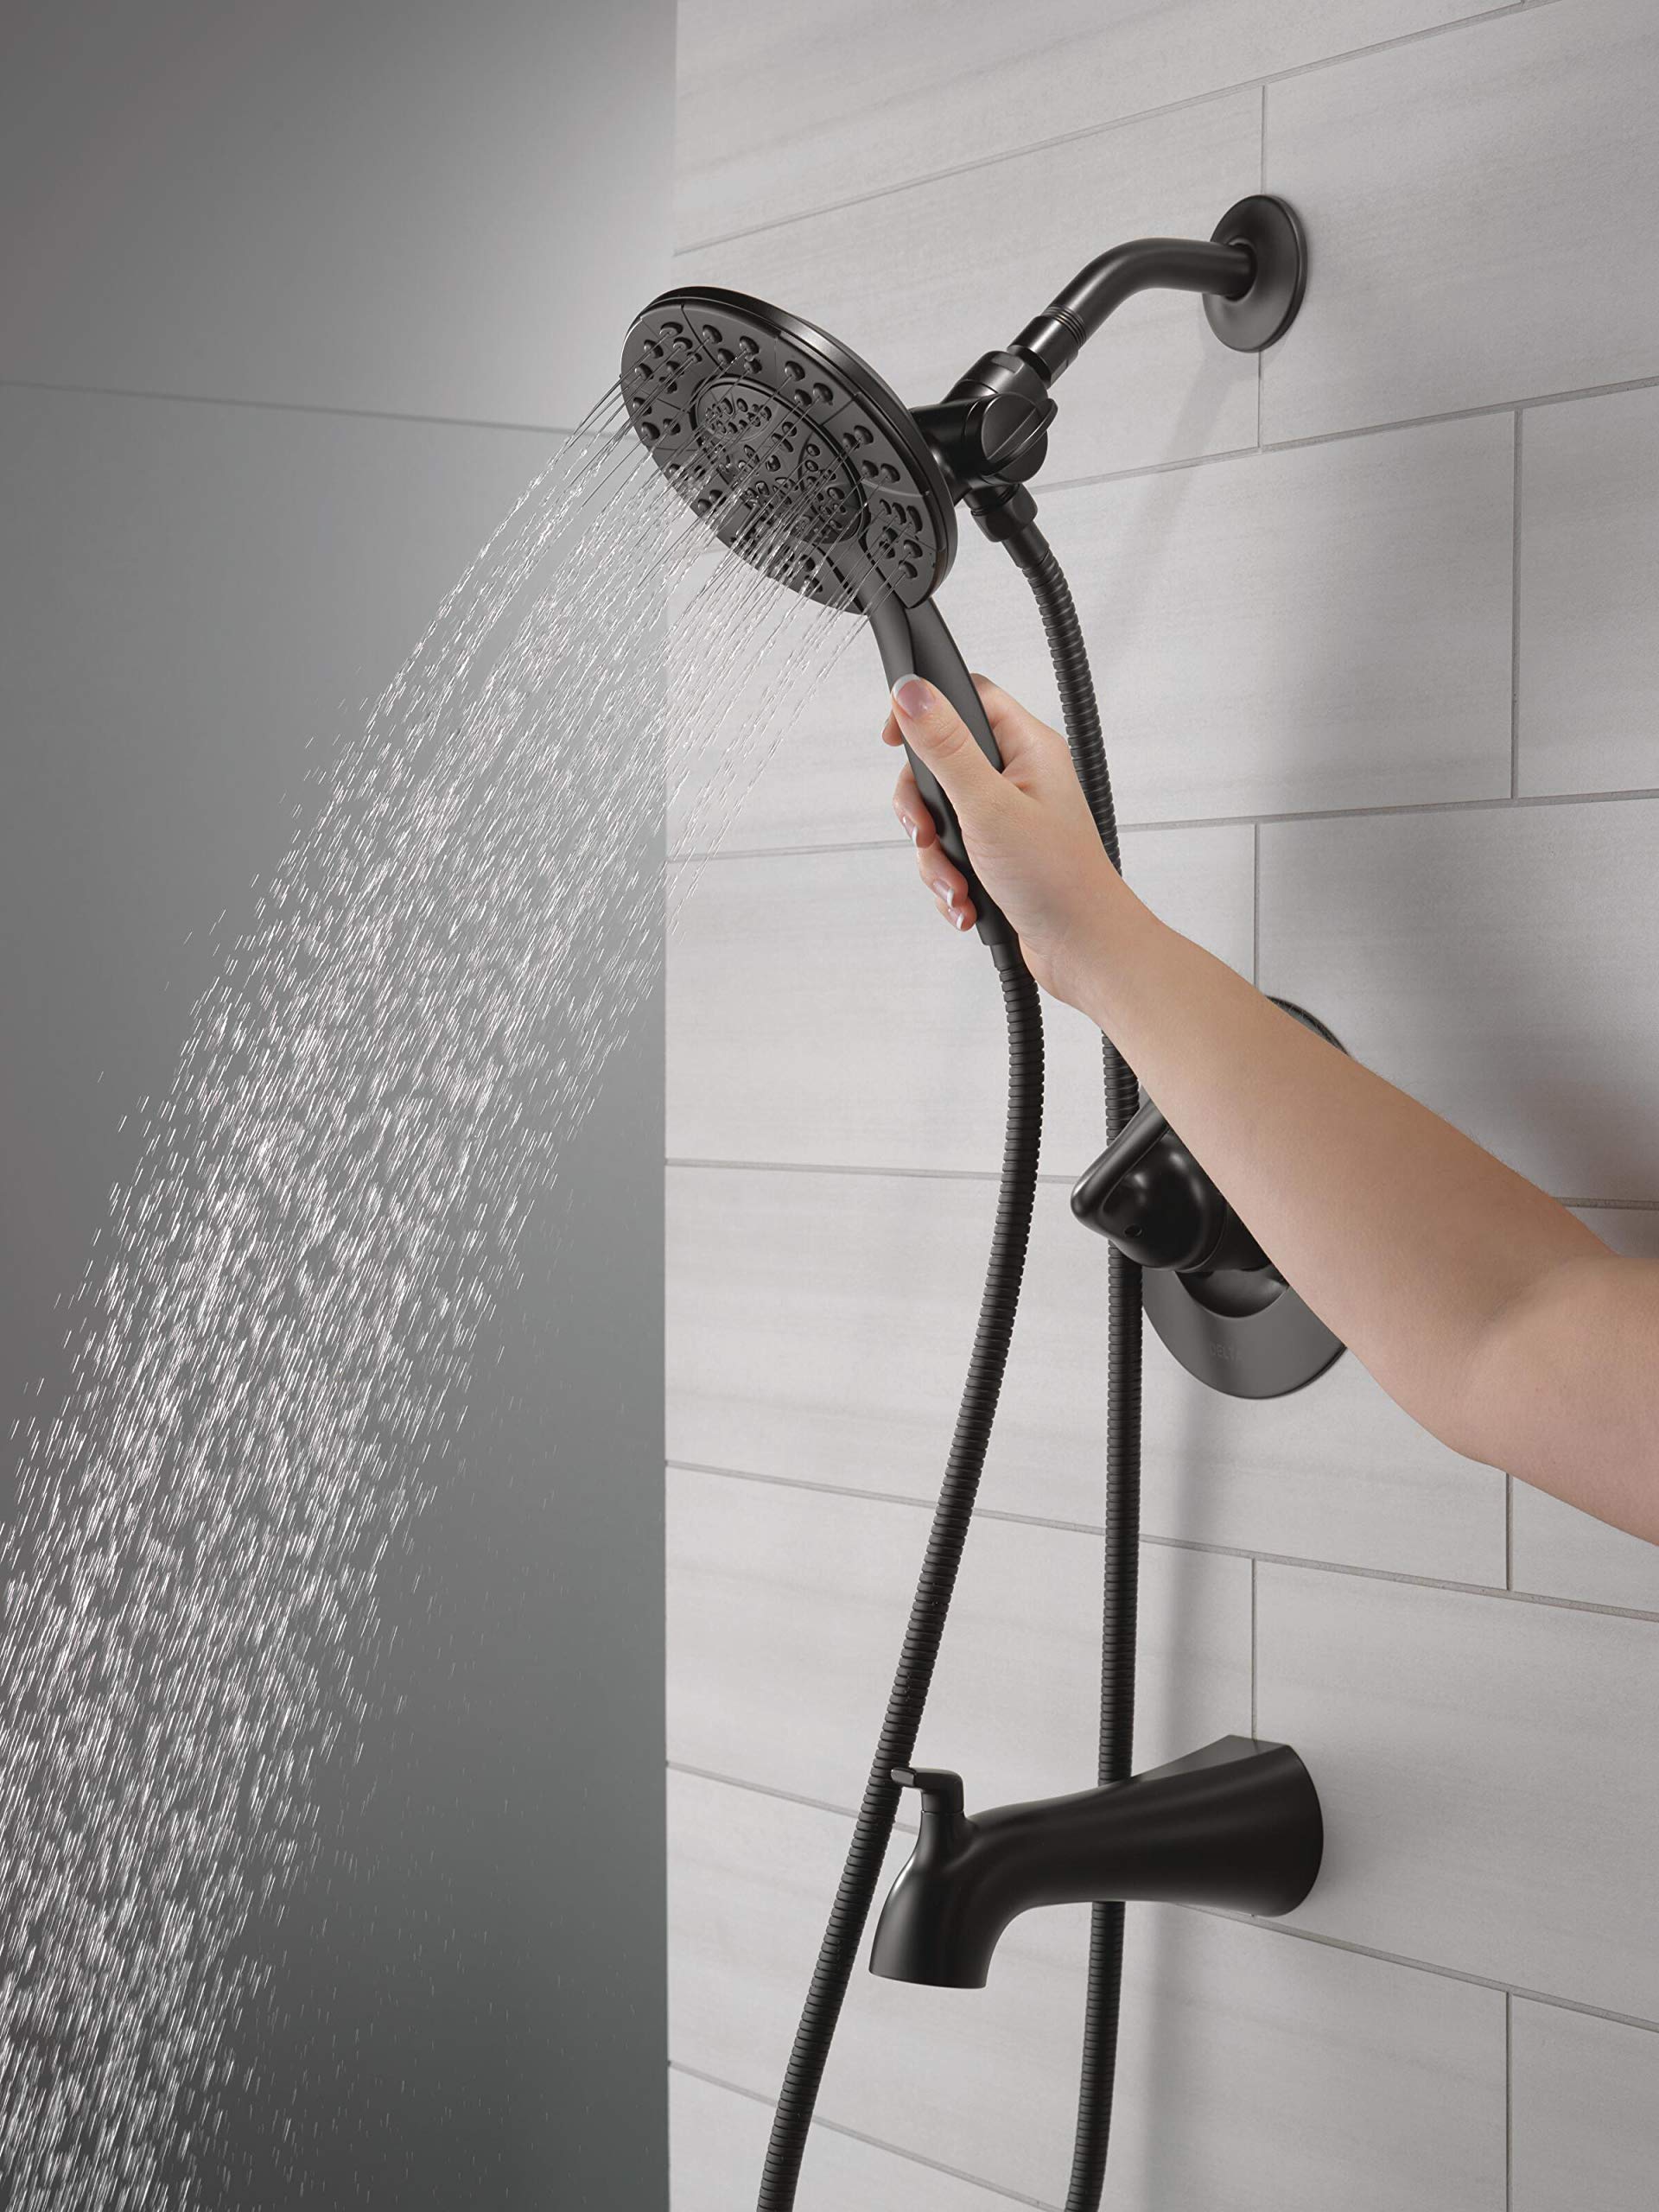 Delta Faucet Arvo 14 Series Single-Handle Tub and Shower Trim Kit, Shower Faucet with 4-Spray In2ition 2-in-1 Dual Hand Held Shower Head with Hose, Matte Black 144840-BL-I (Valve Included)